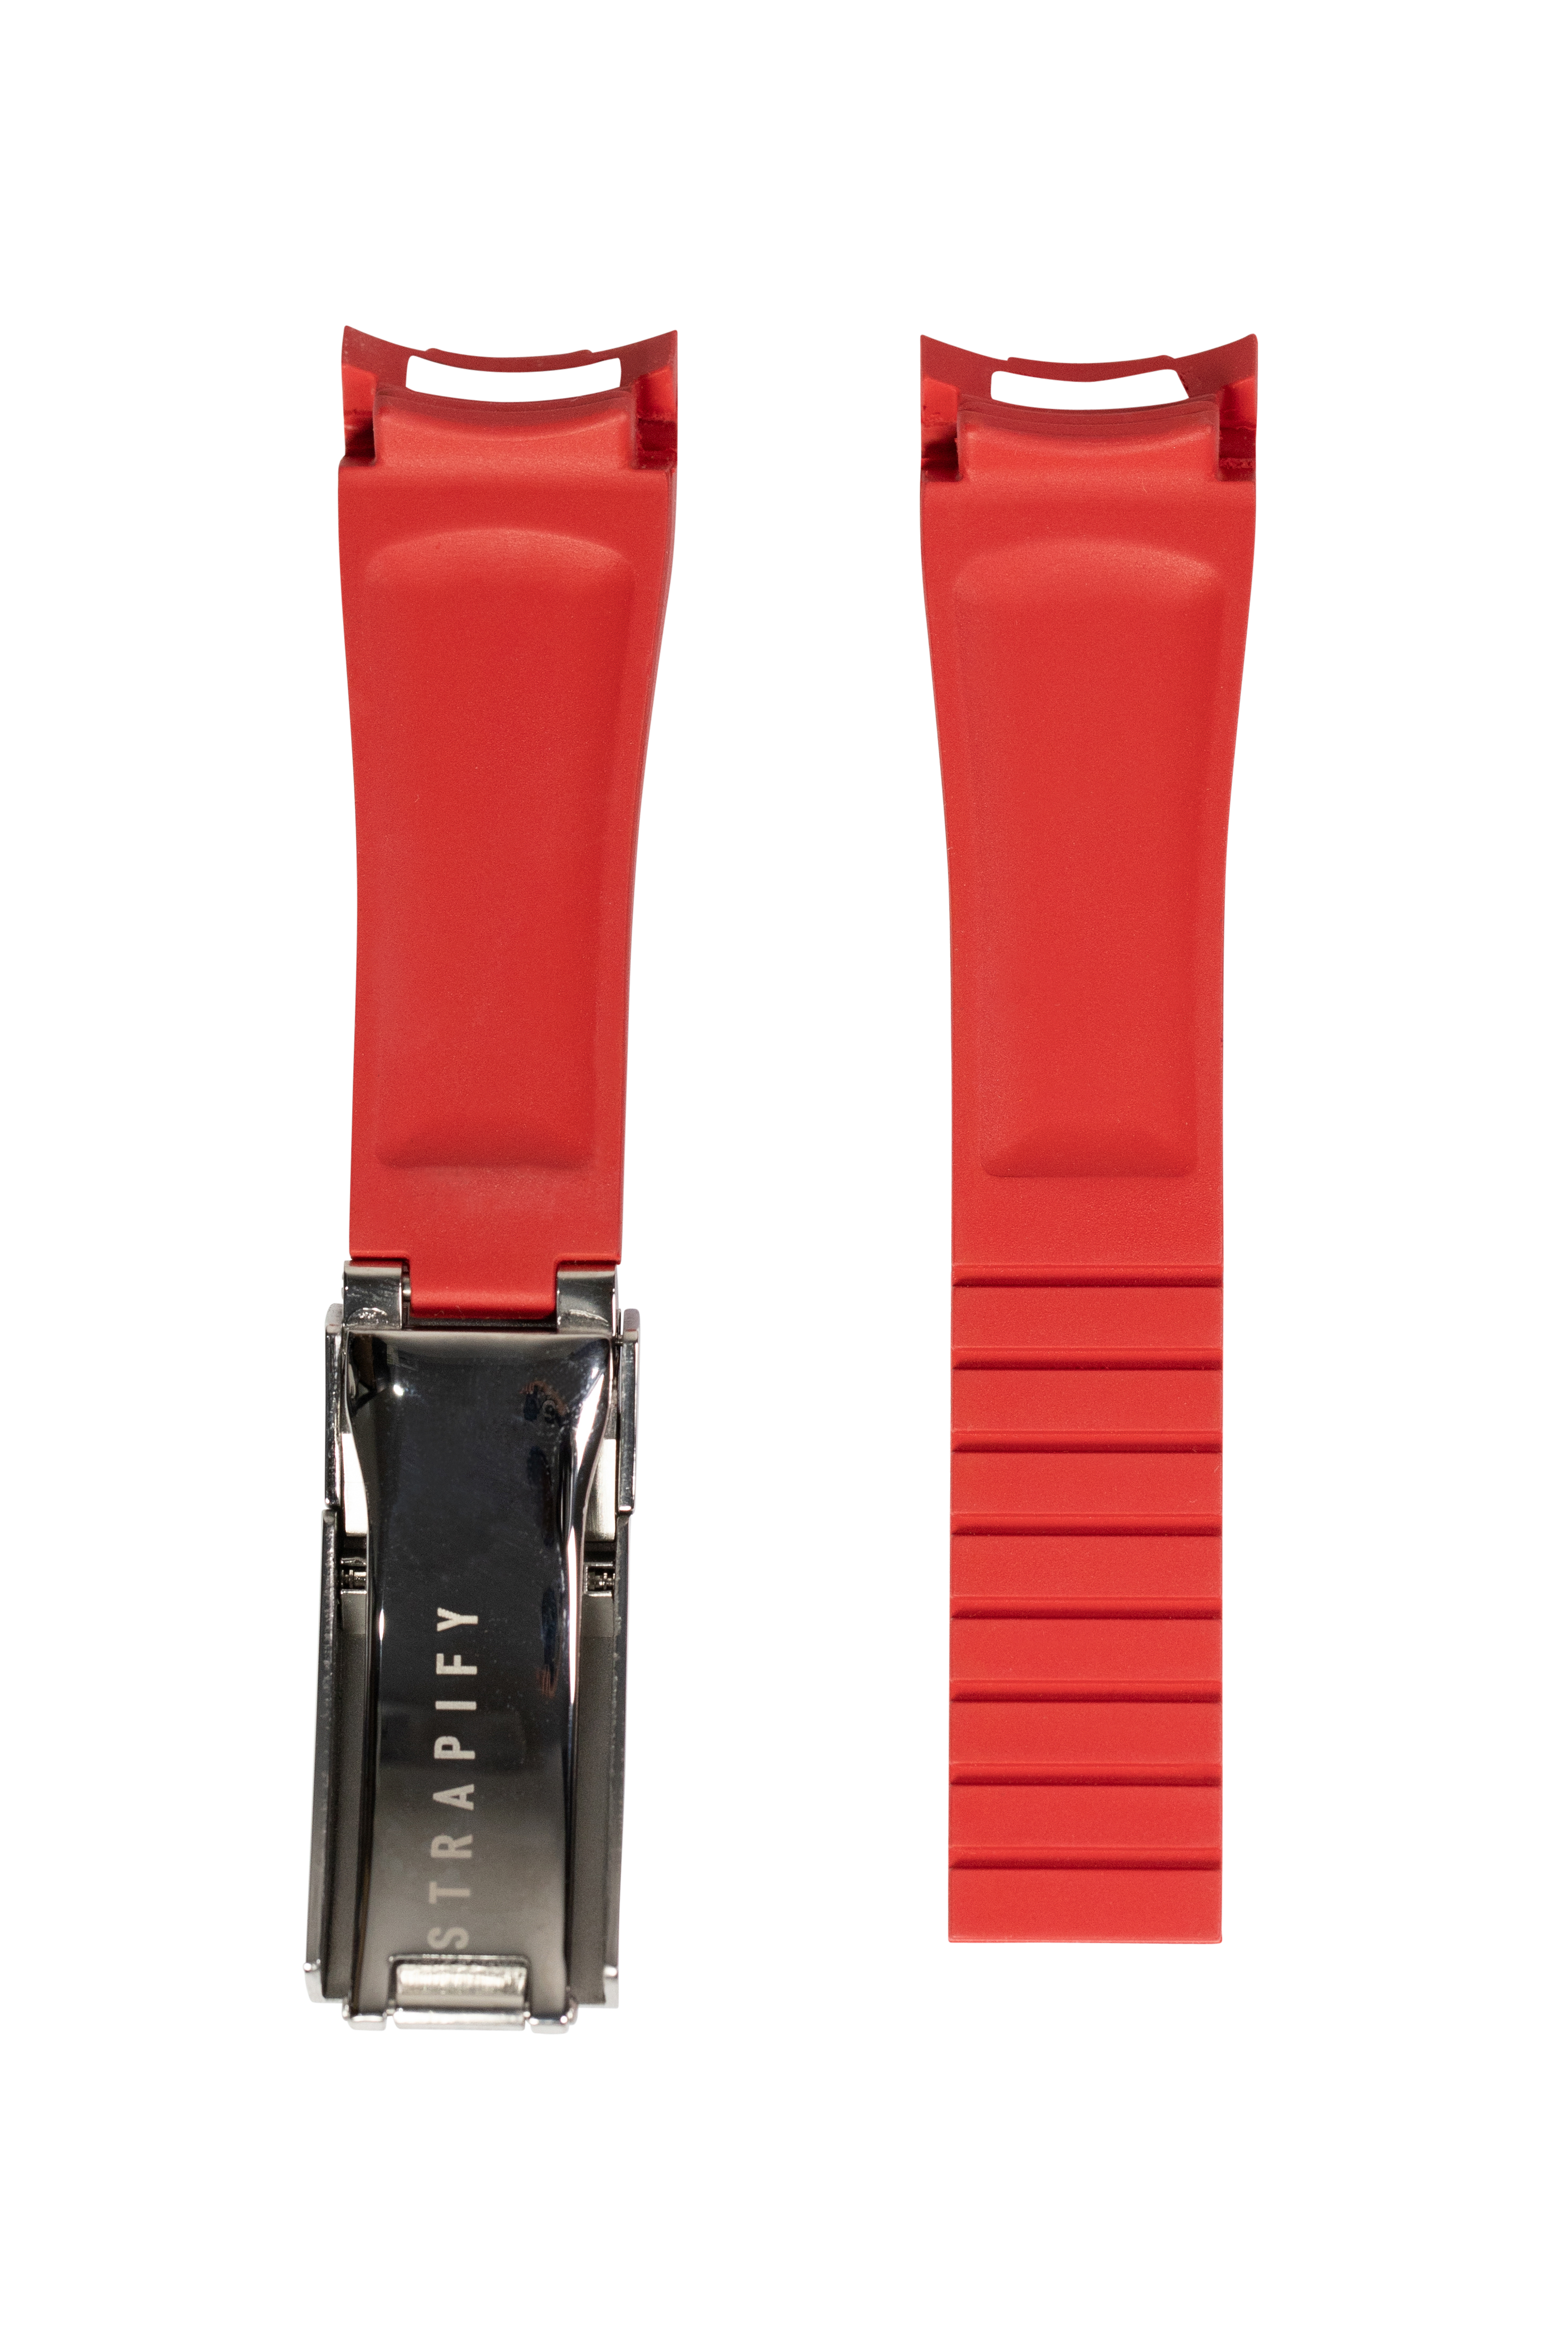 [Rolex Only] Vulcanised Rubber with Oyster Clasp  - Red